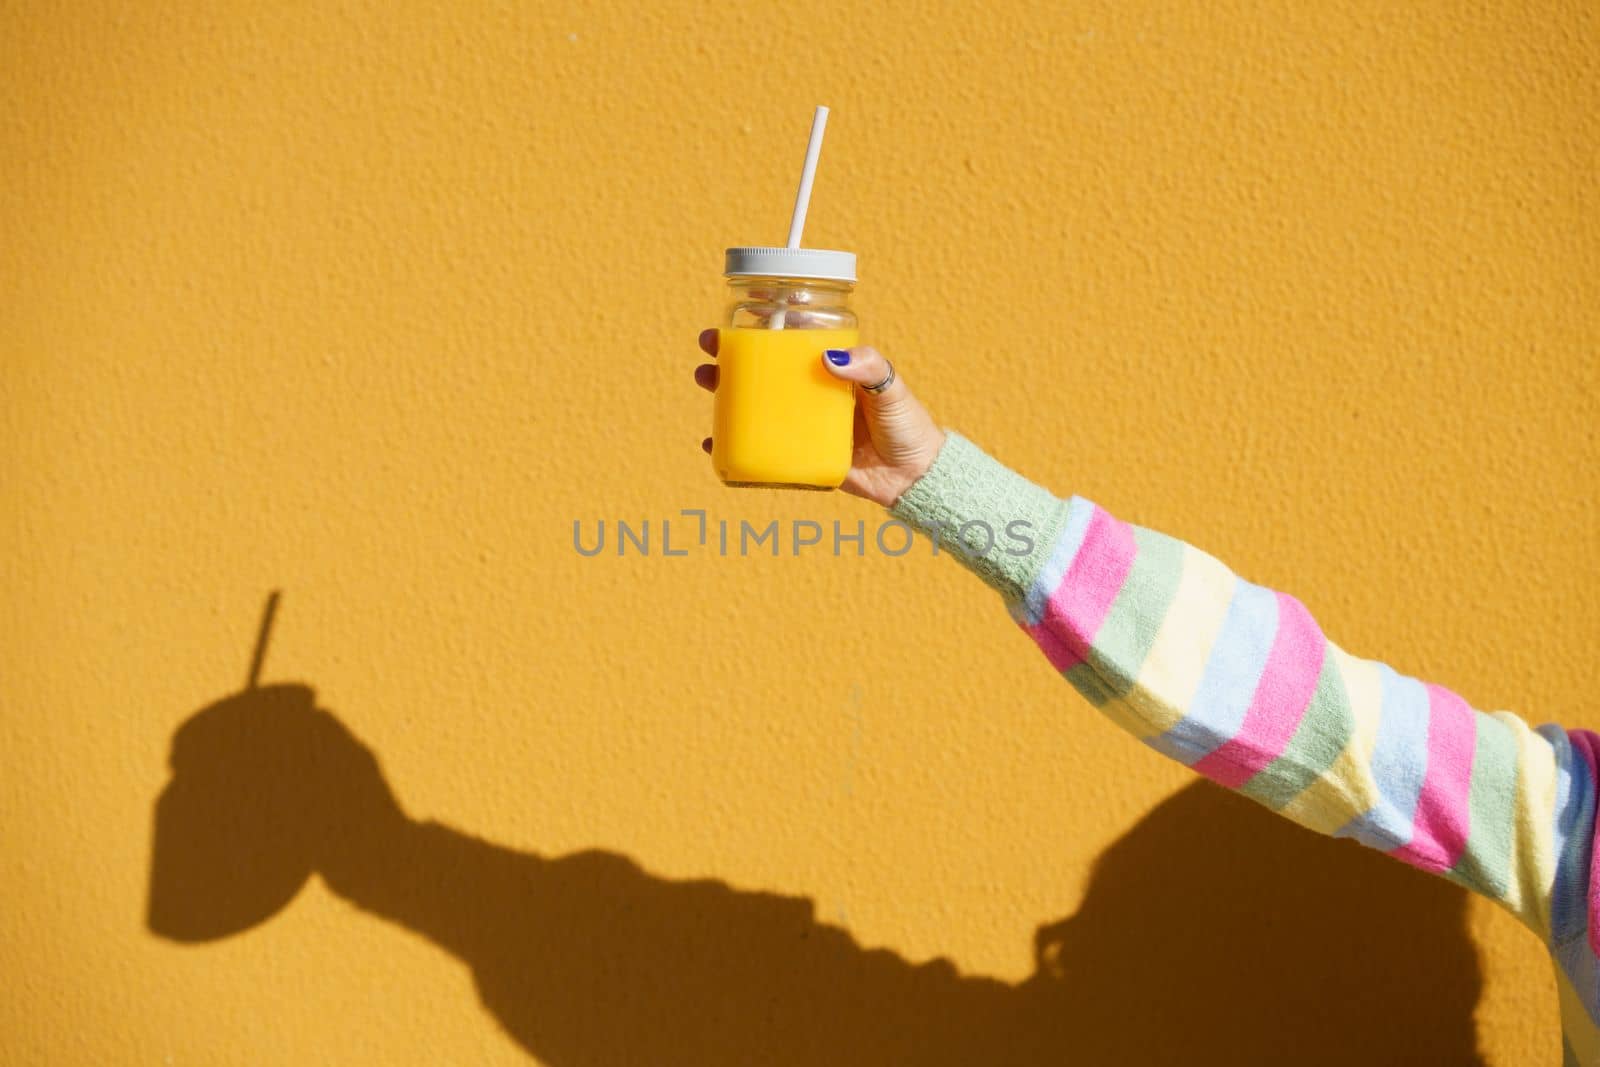 Female hands holding a glass tumbler with lid and straw, to take away, filled with fresh orange juice. Yellow background.